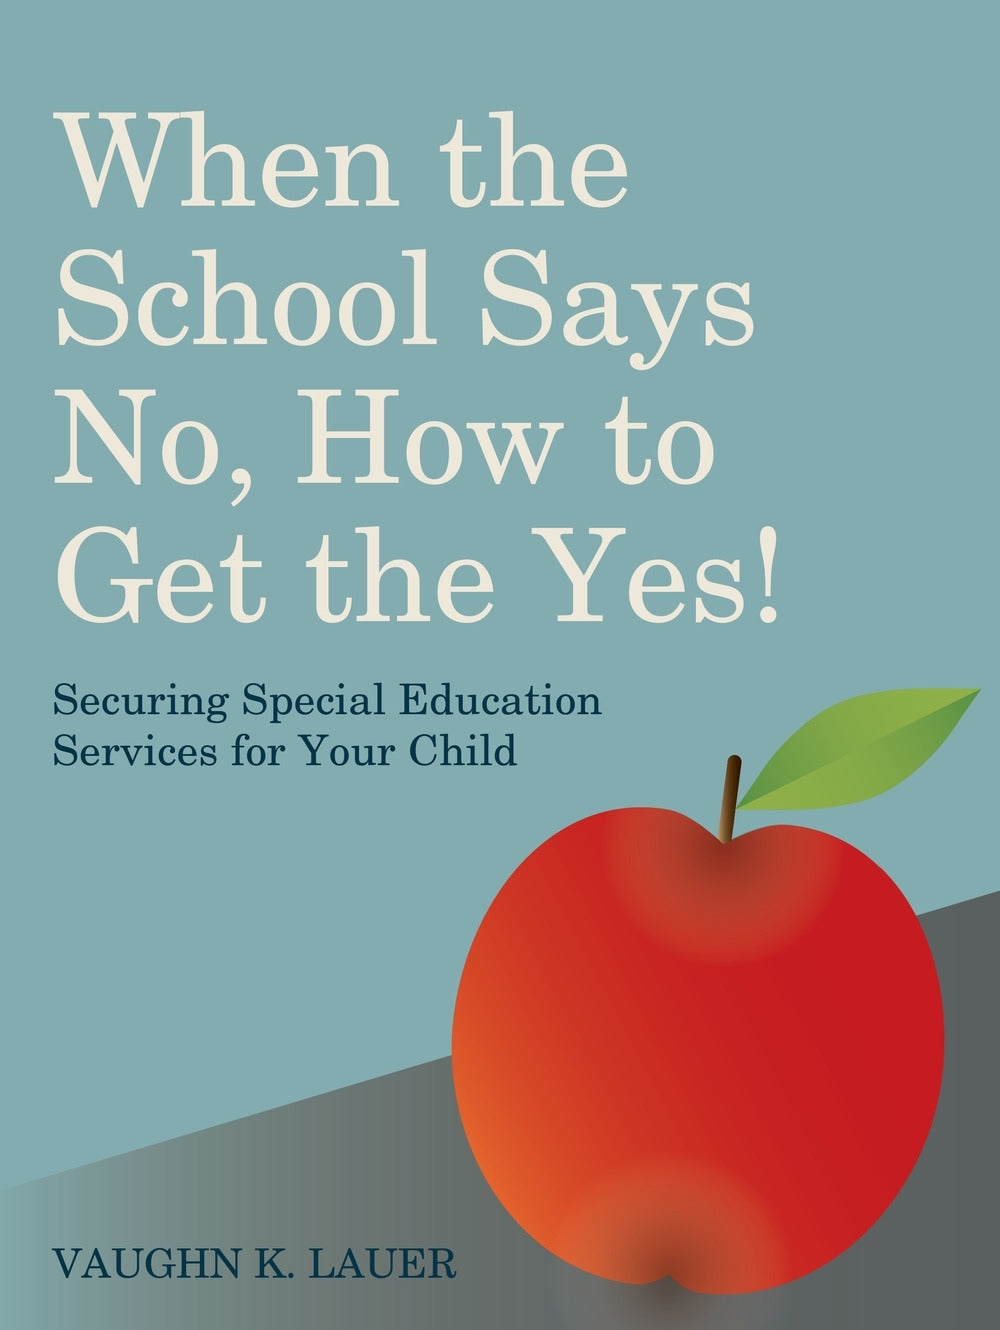 When the School Says No...How to Get the Yes! by Vaughn Lauer